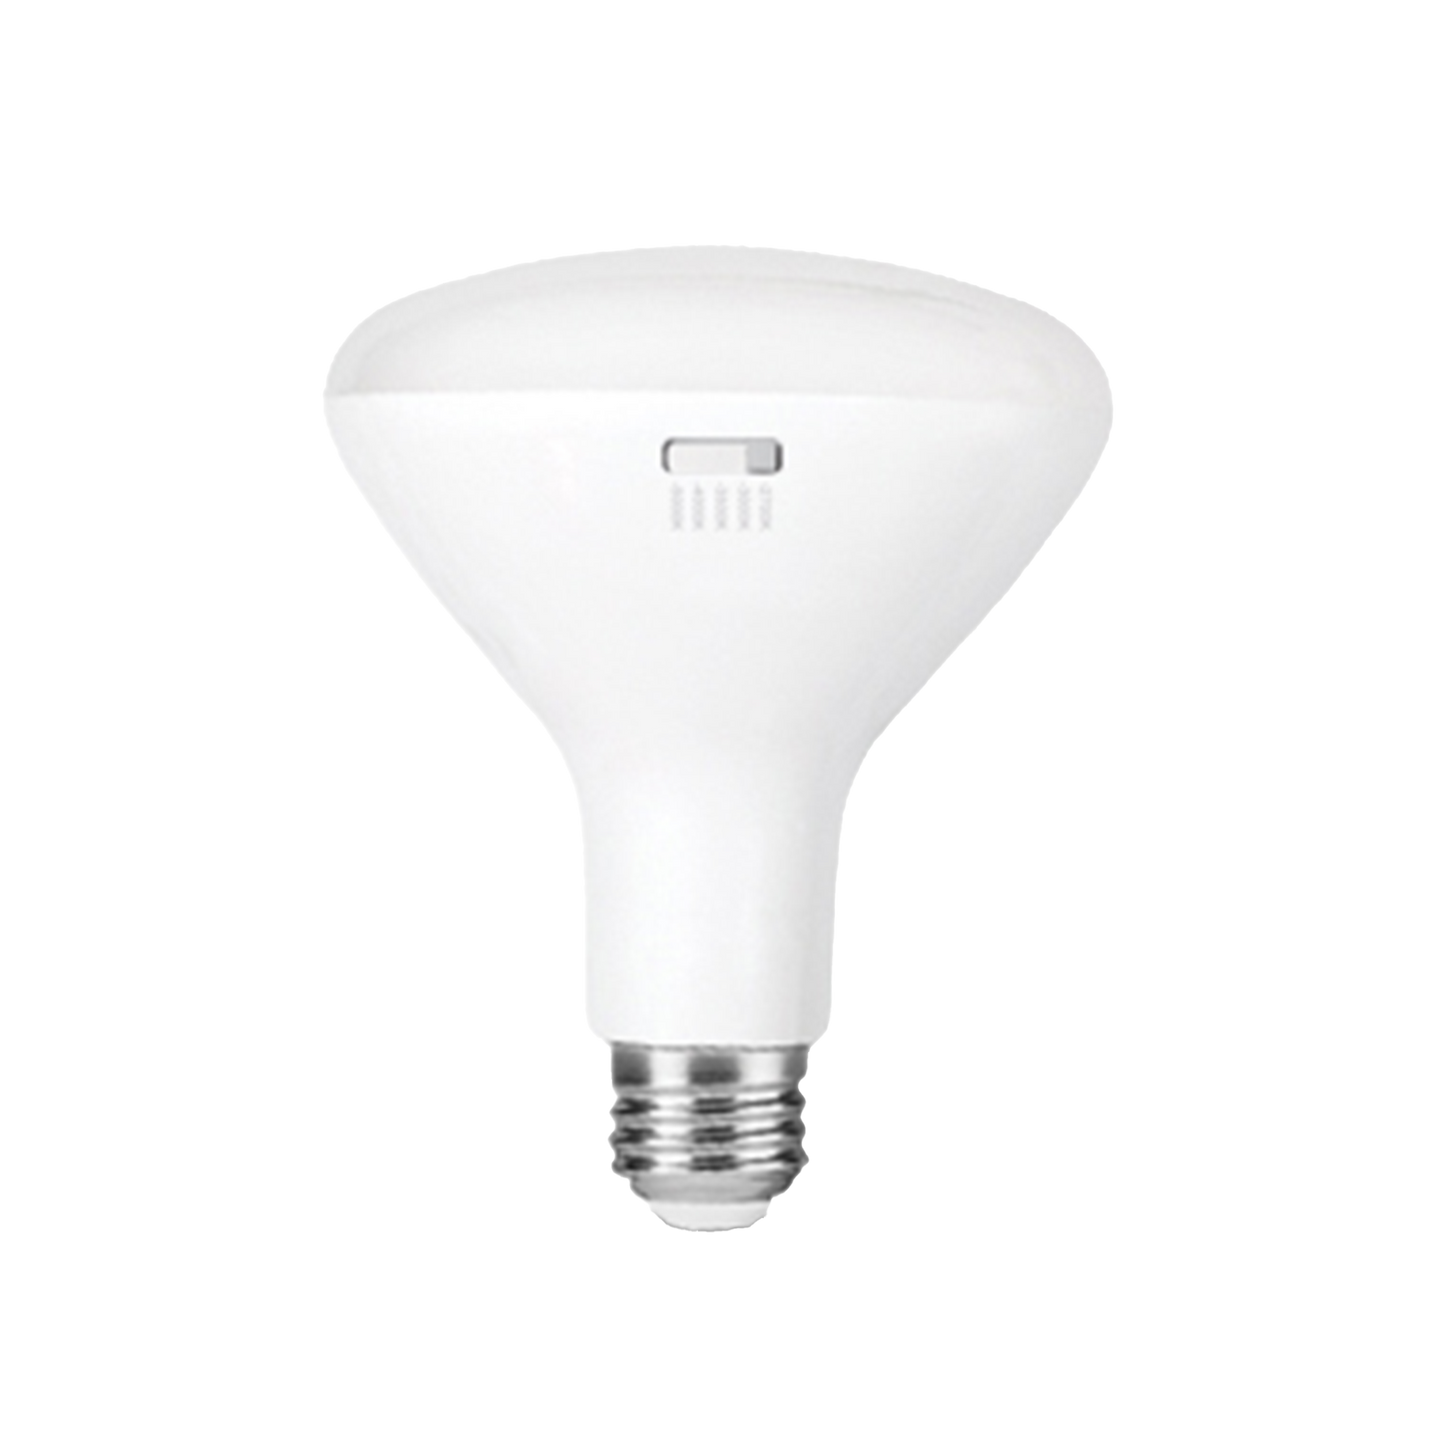 BR30 LED light bulb that can provide golden amber glows to a platinum white light.